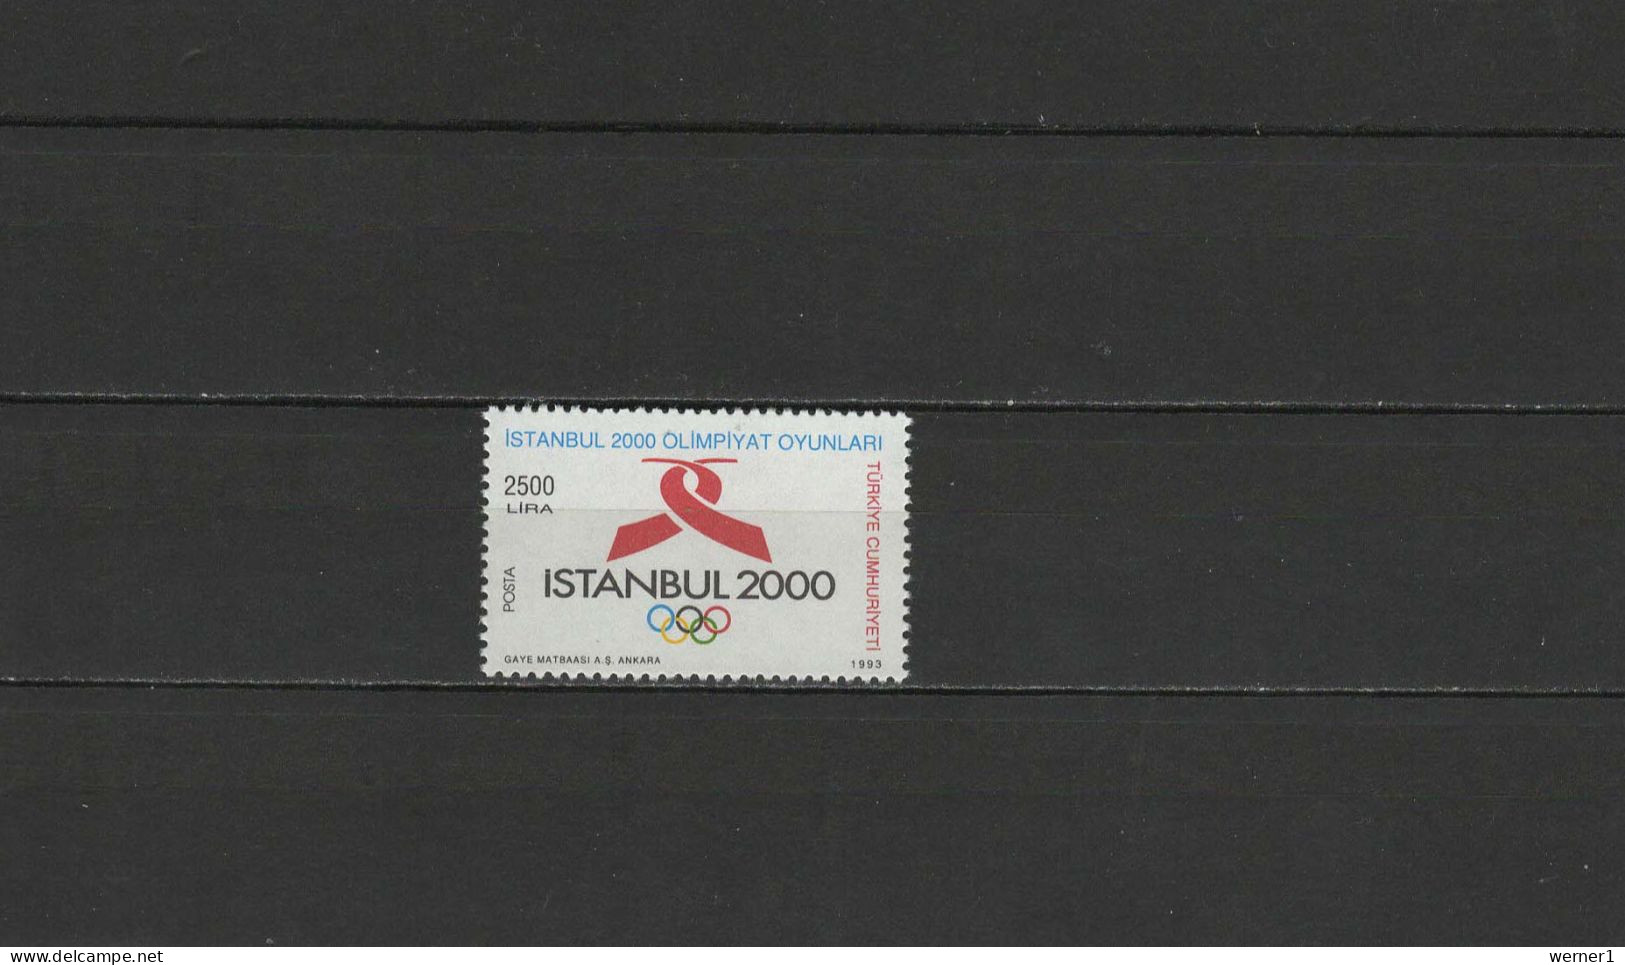 Turkey 1993 Olympic Games Stamp "Istanbul 2000" MNH - Ete 1992: Barcelone